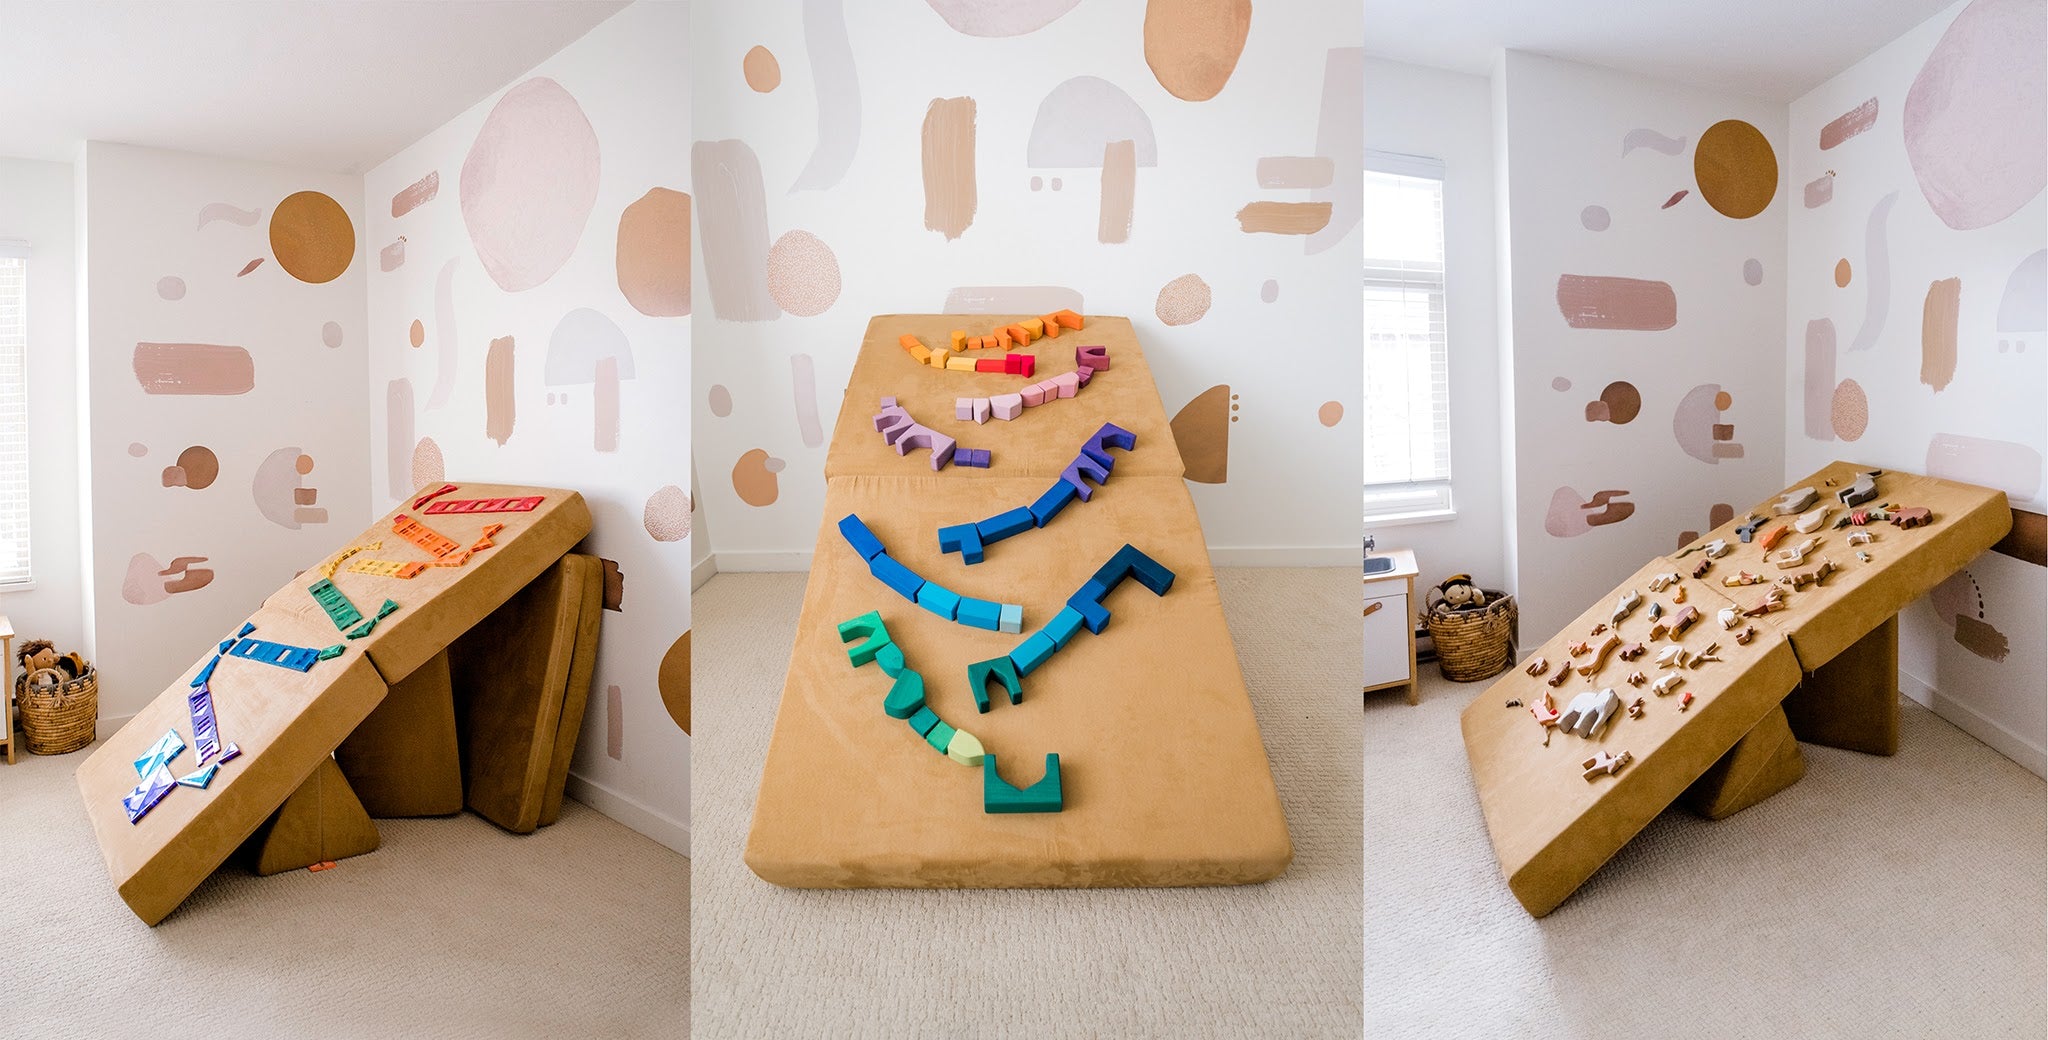 Full-size ball run options, with colorful wooden toys on a Sandcastle Nugget